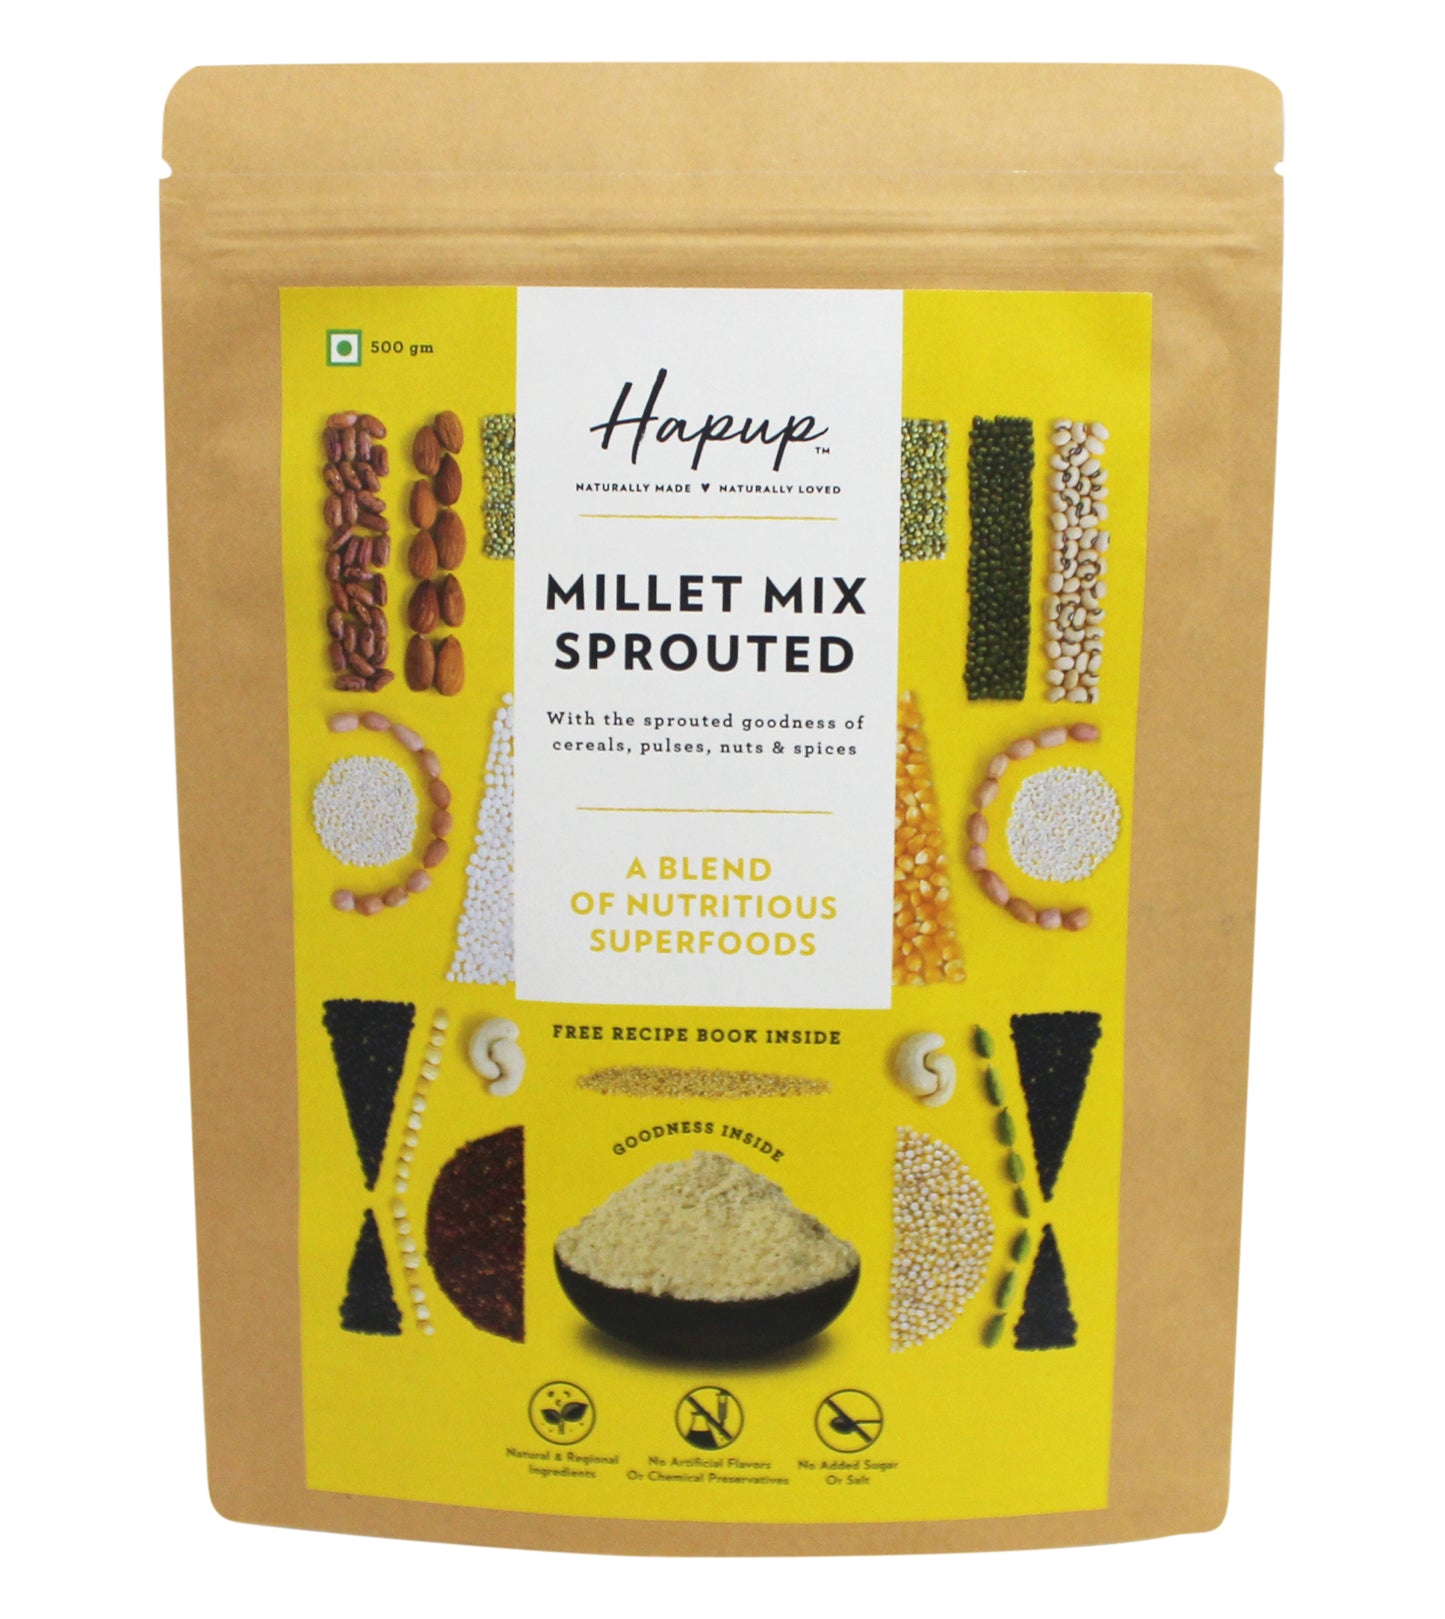 Millet Mix Sprouted-3 Months Subscription-Save 15%- 500gm X 3